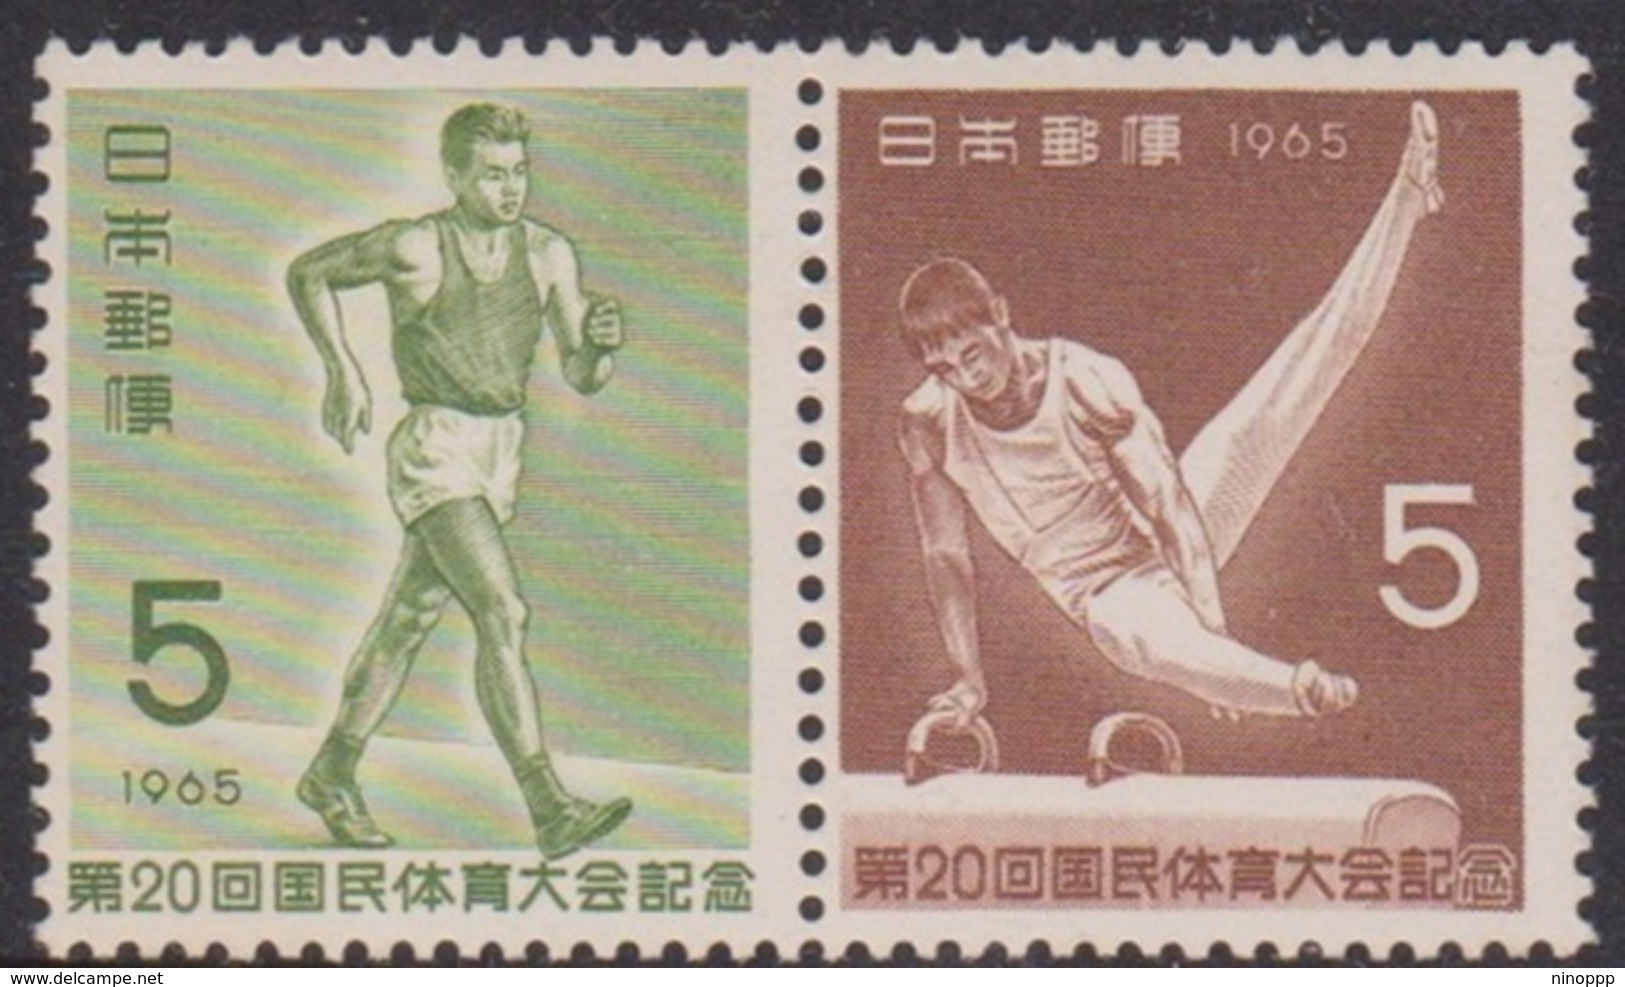 Japan SG1012-1013 1965 20th National Athletic Meeting, Mint Never Hinged - Unused Stamps